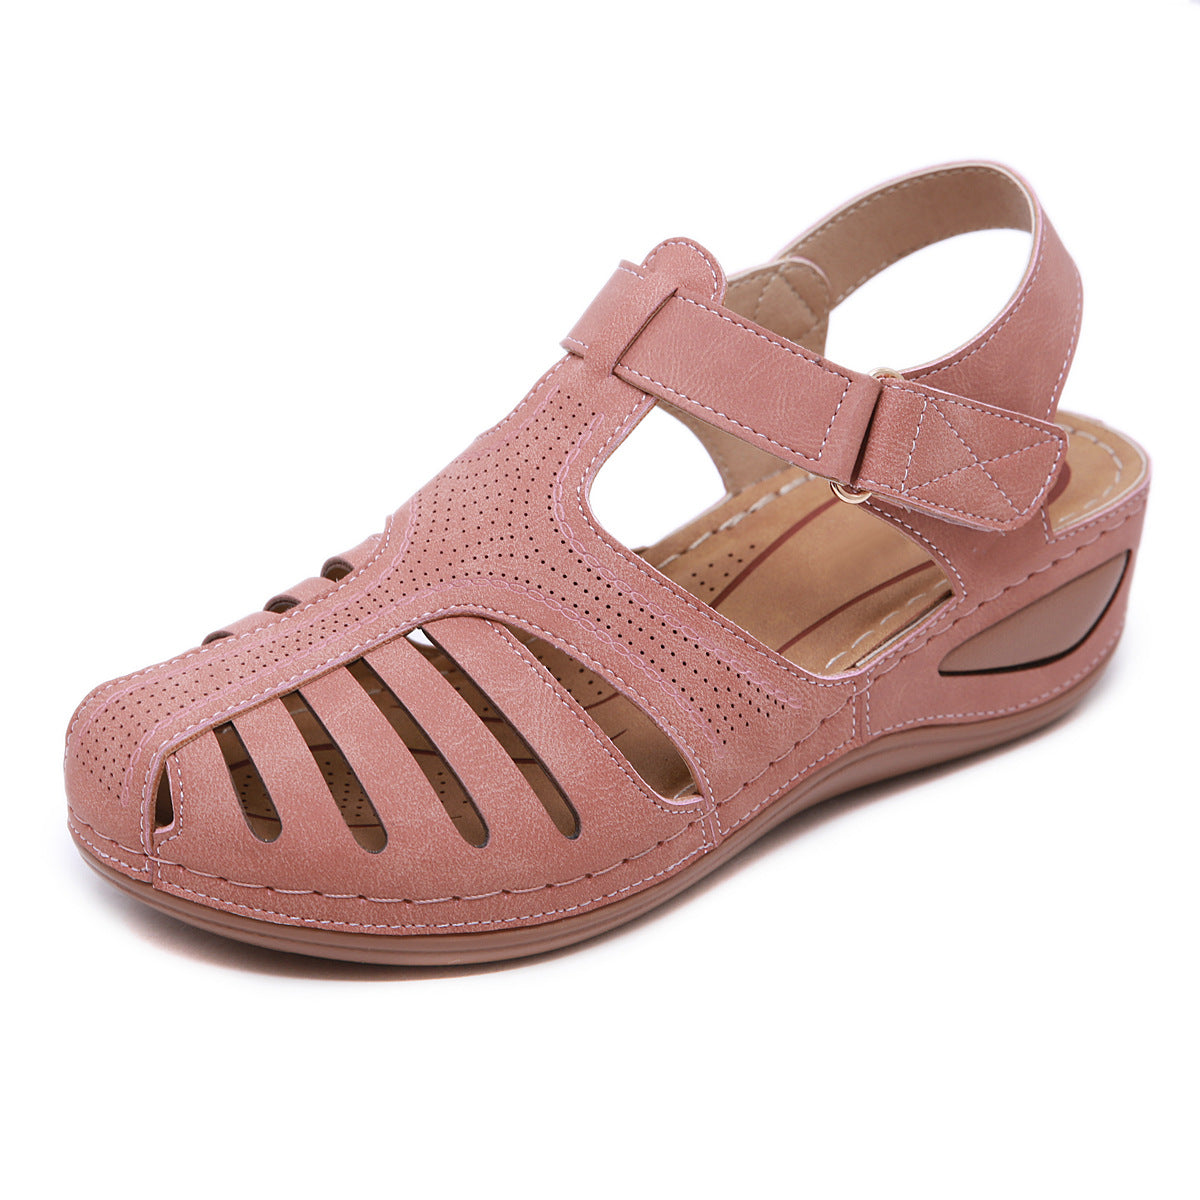 Closed Toe Velcro Wedge Sandals Pink